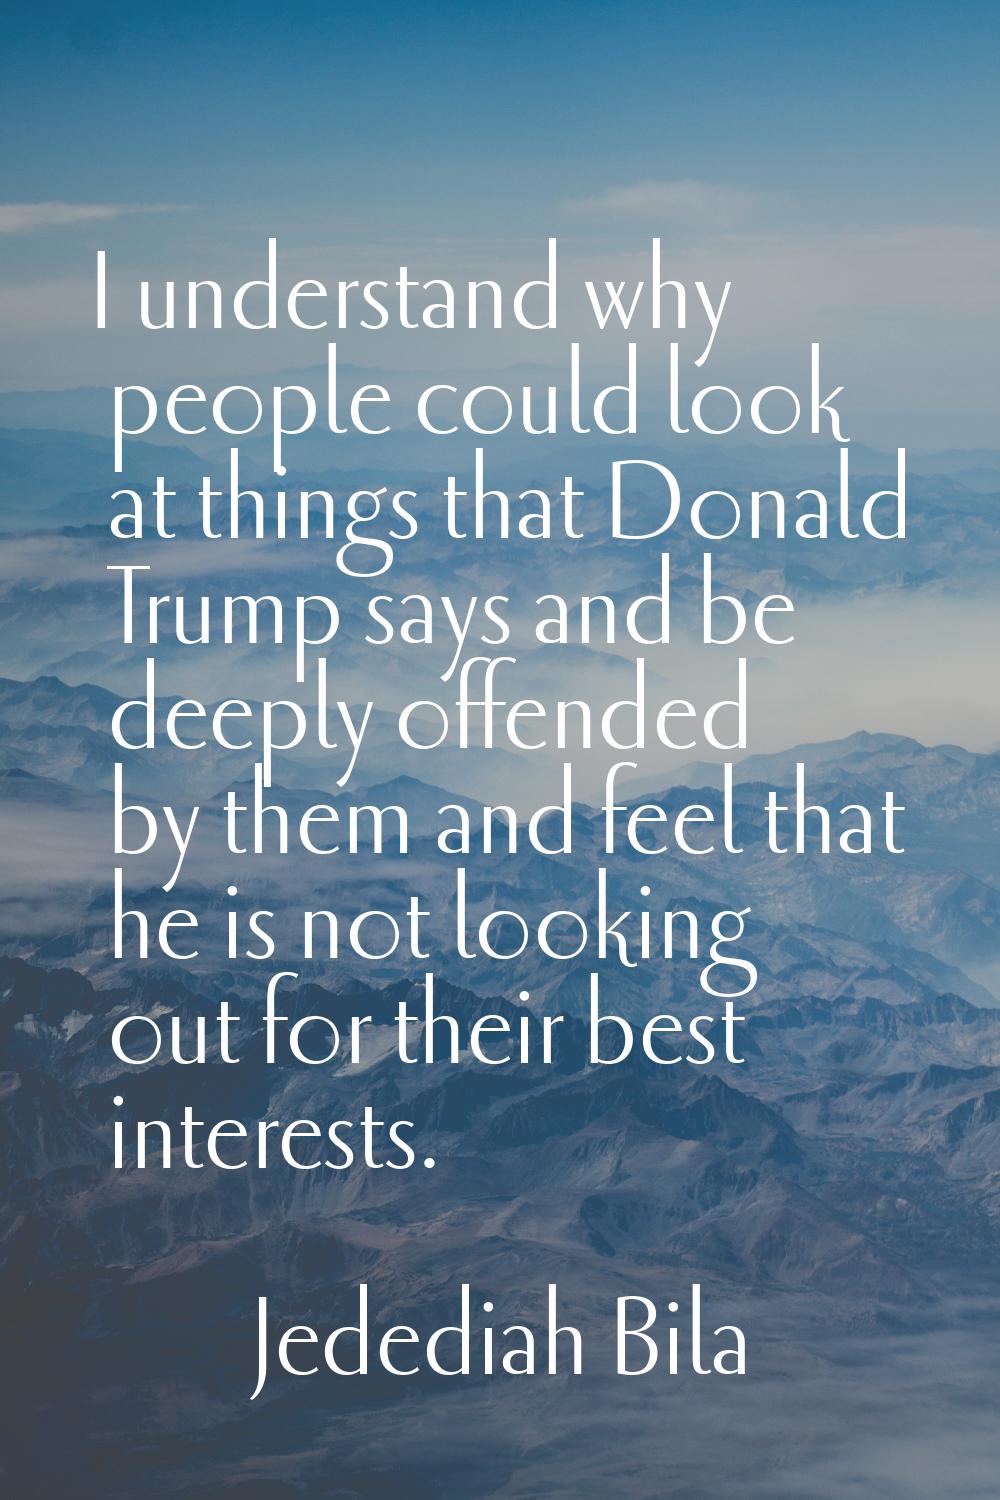 I understand why people could look at things that Donald Trump says and be deeply offended by them 